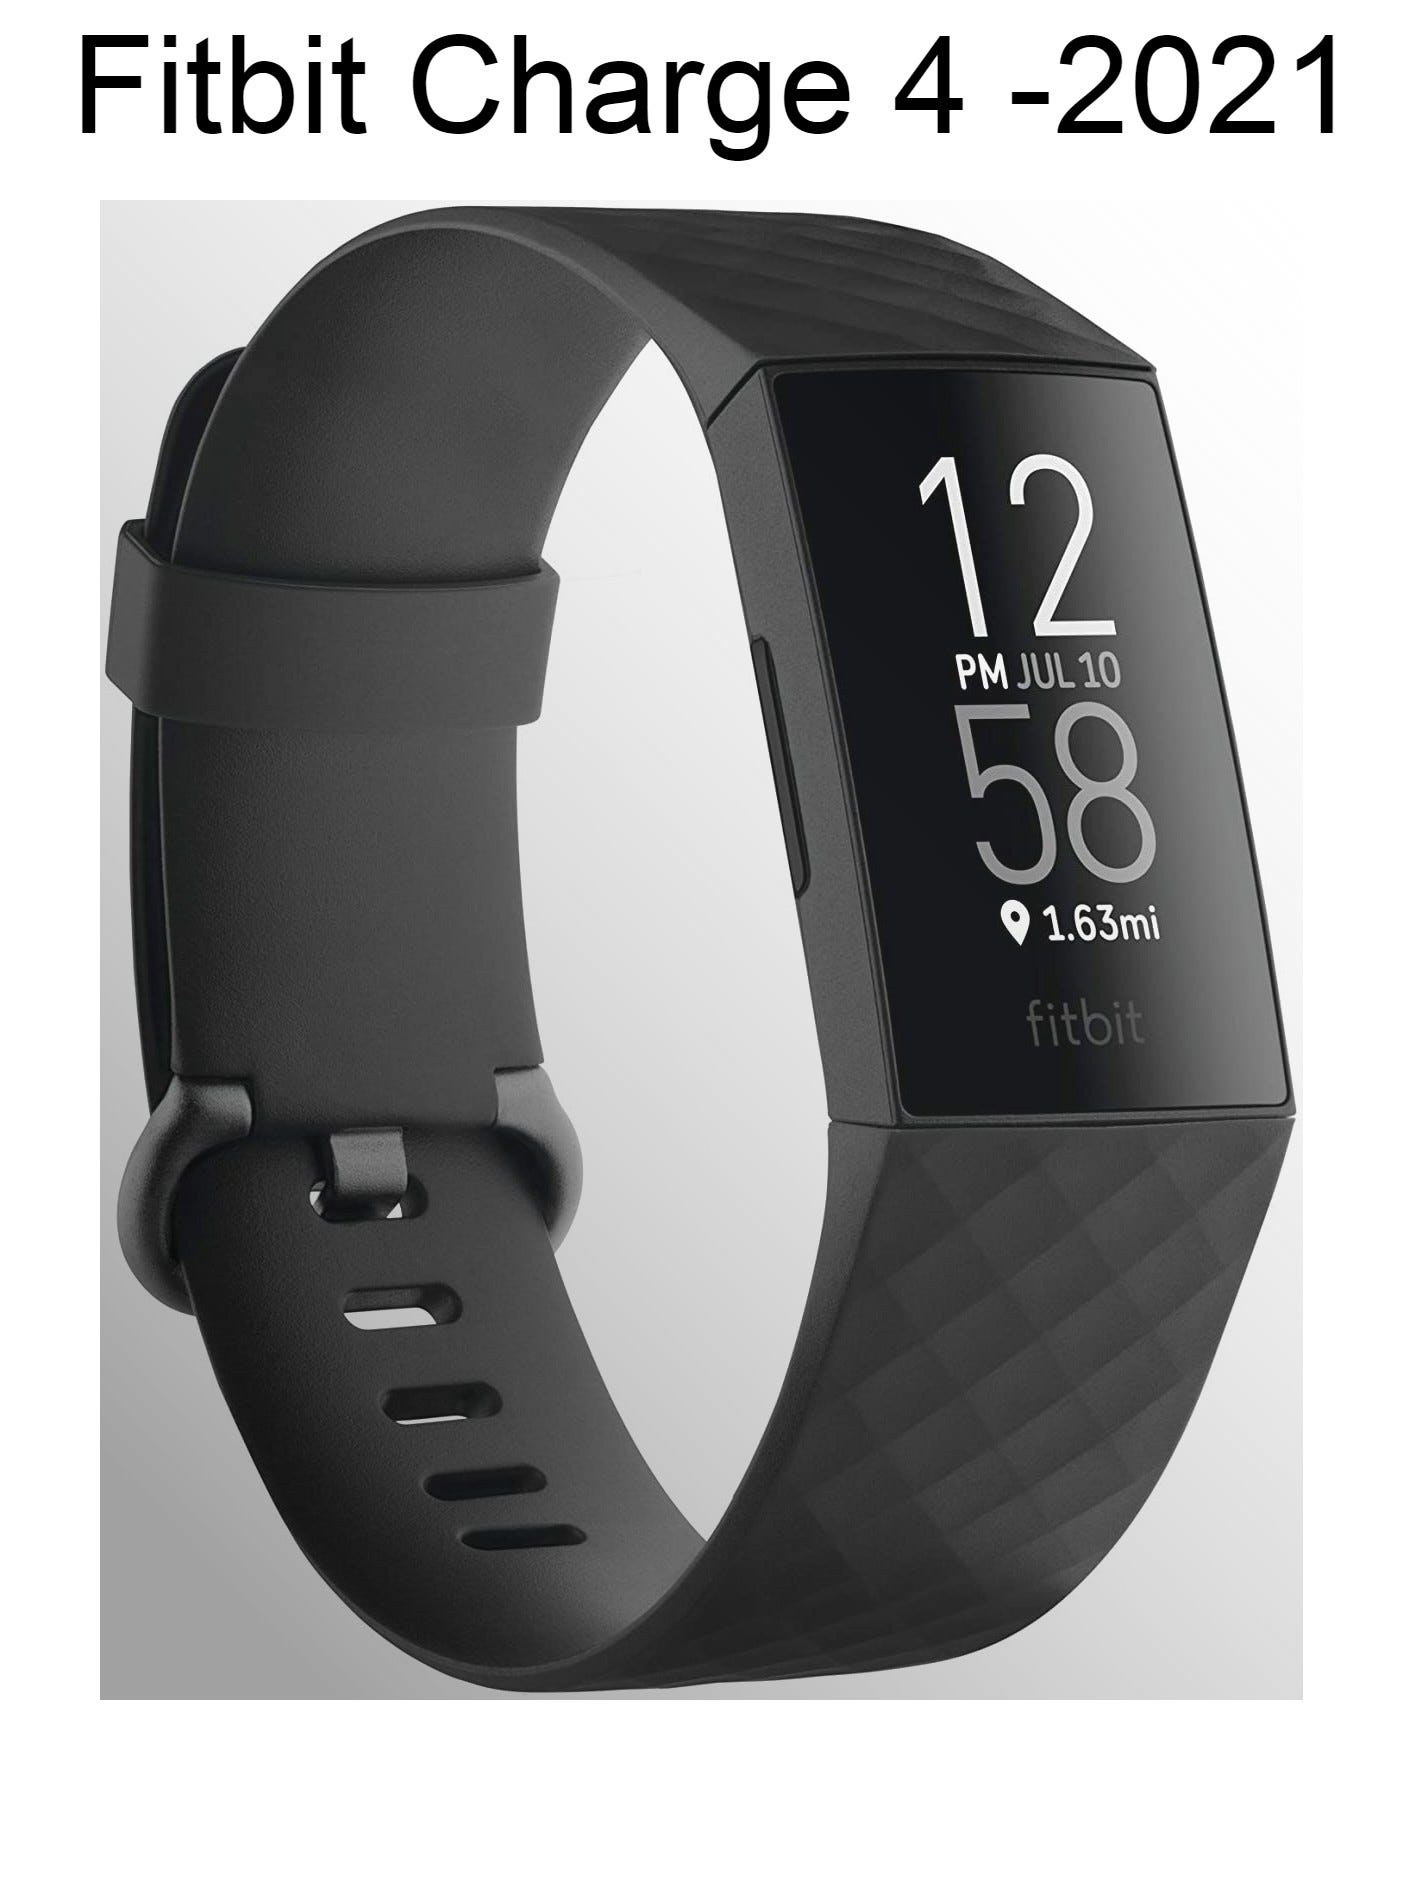 fitbit charge 3 startup